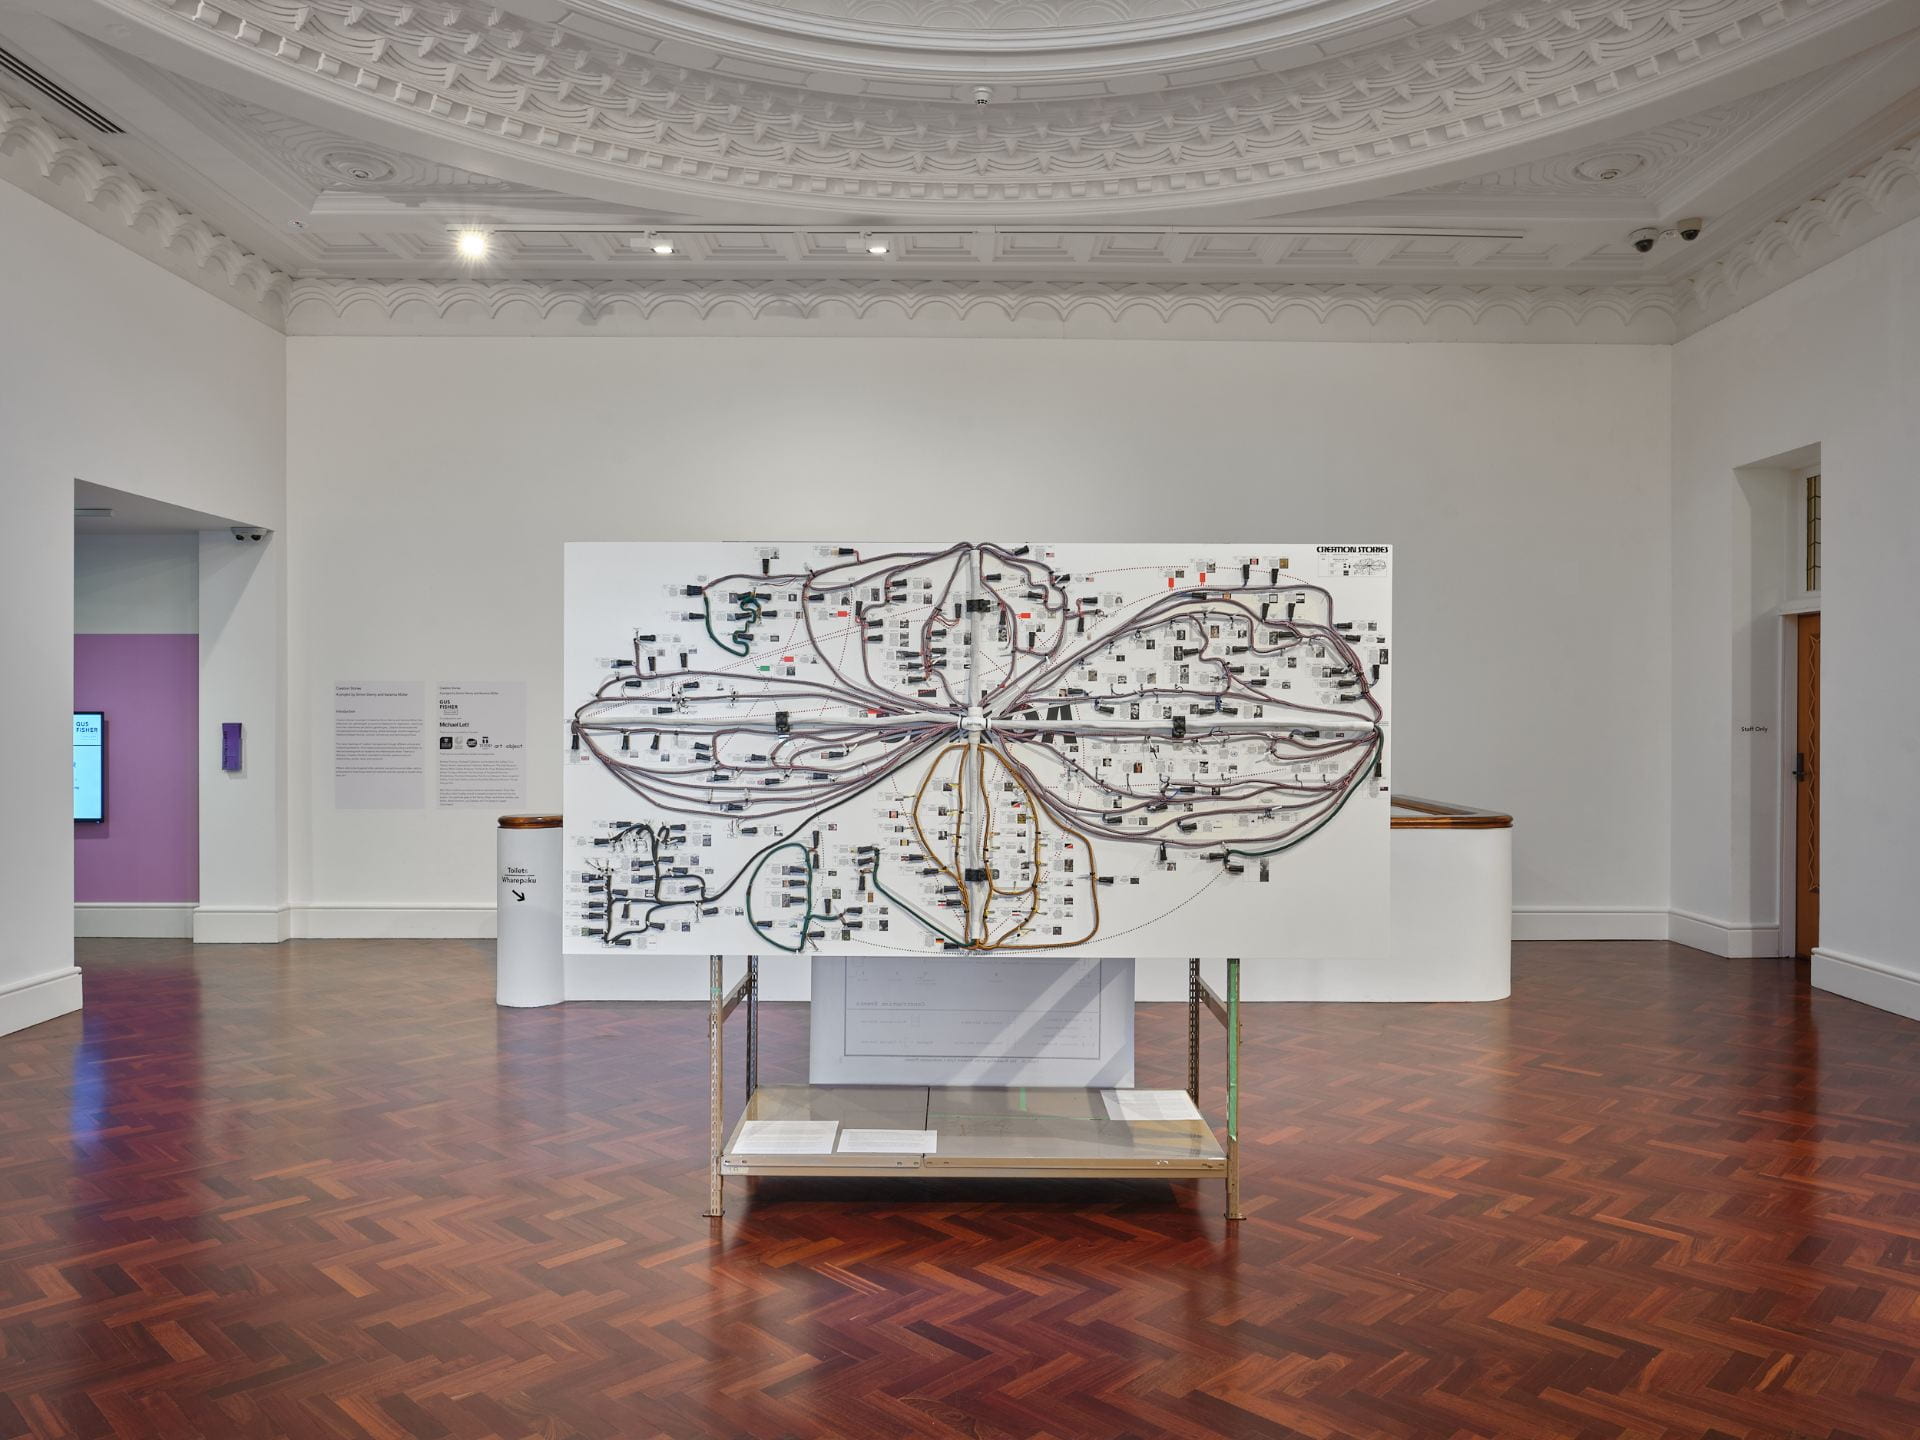 A large board covered in cables and diagrams is attached to a brown metal shelving unit and stands in the middle of a white gallery space.